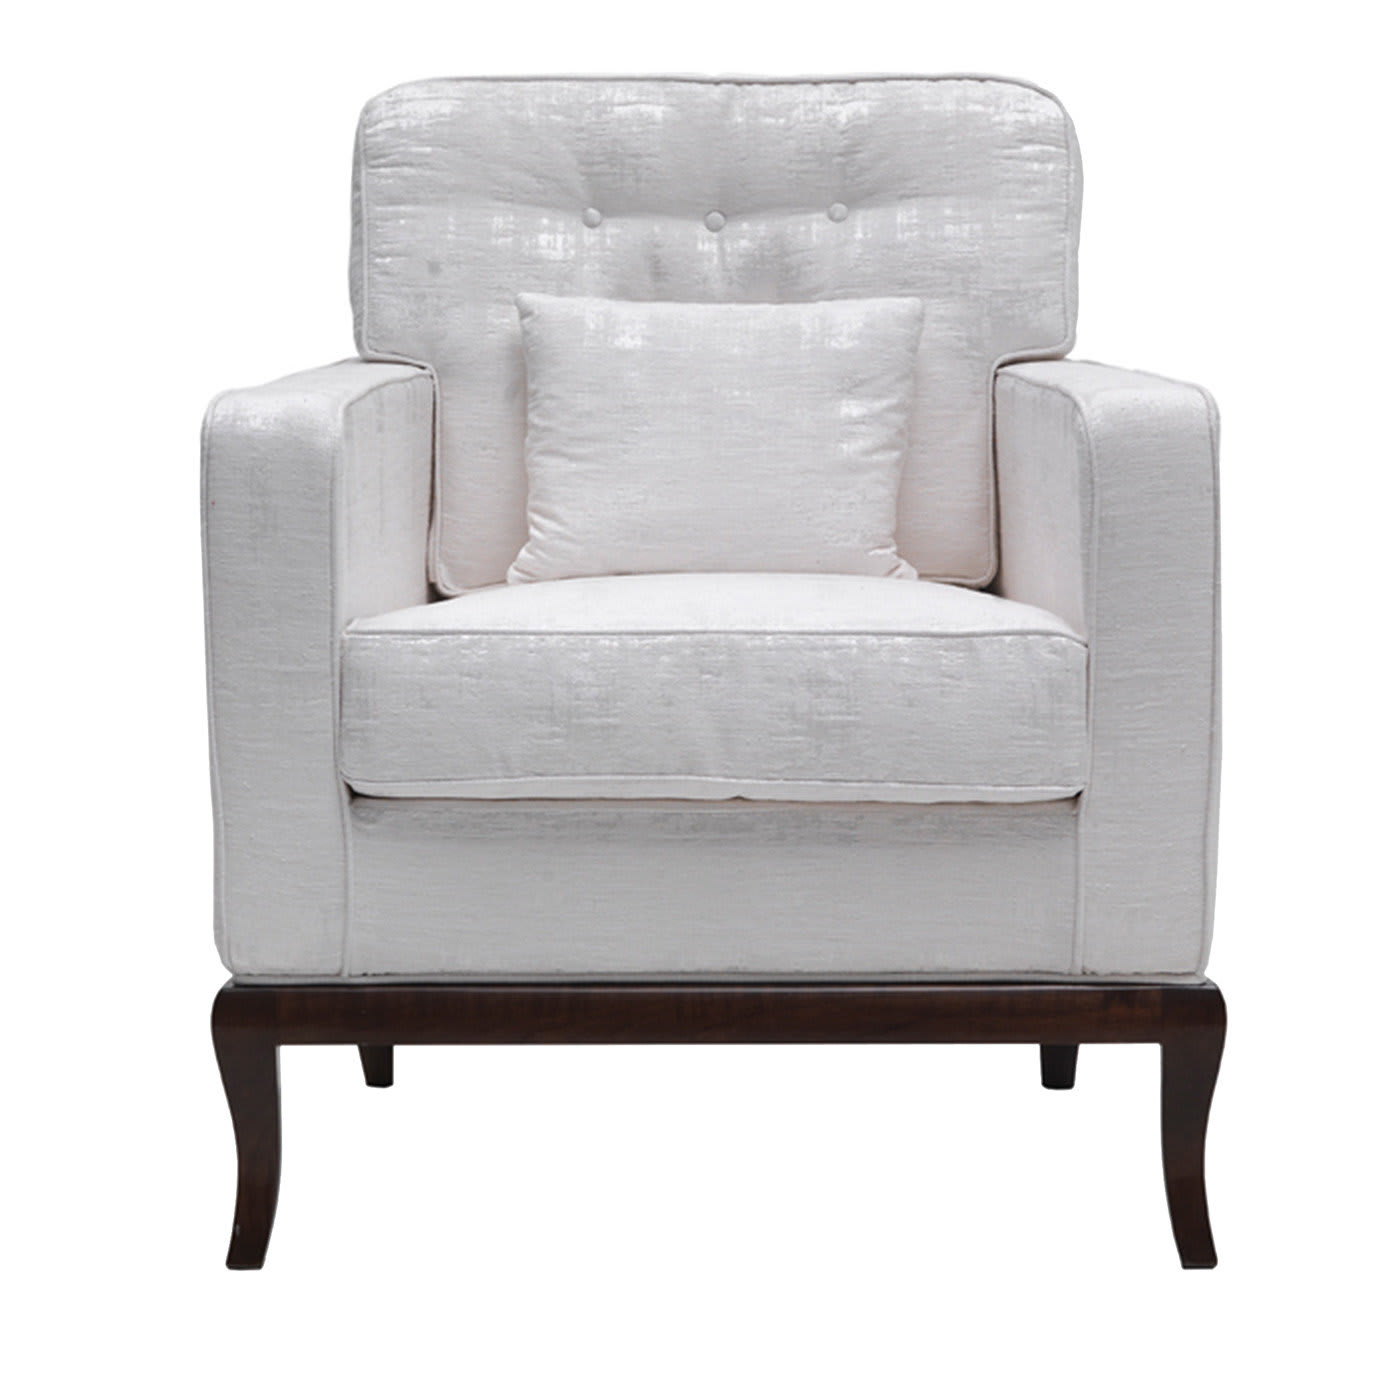 White Cherry Armchair - Annibale Colombo